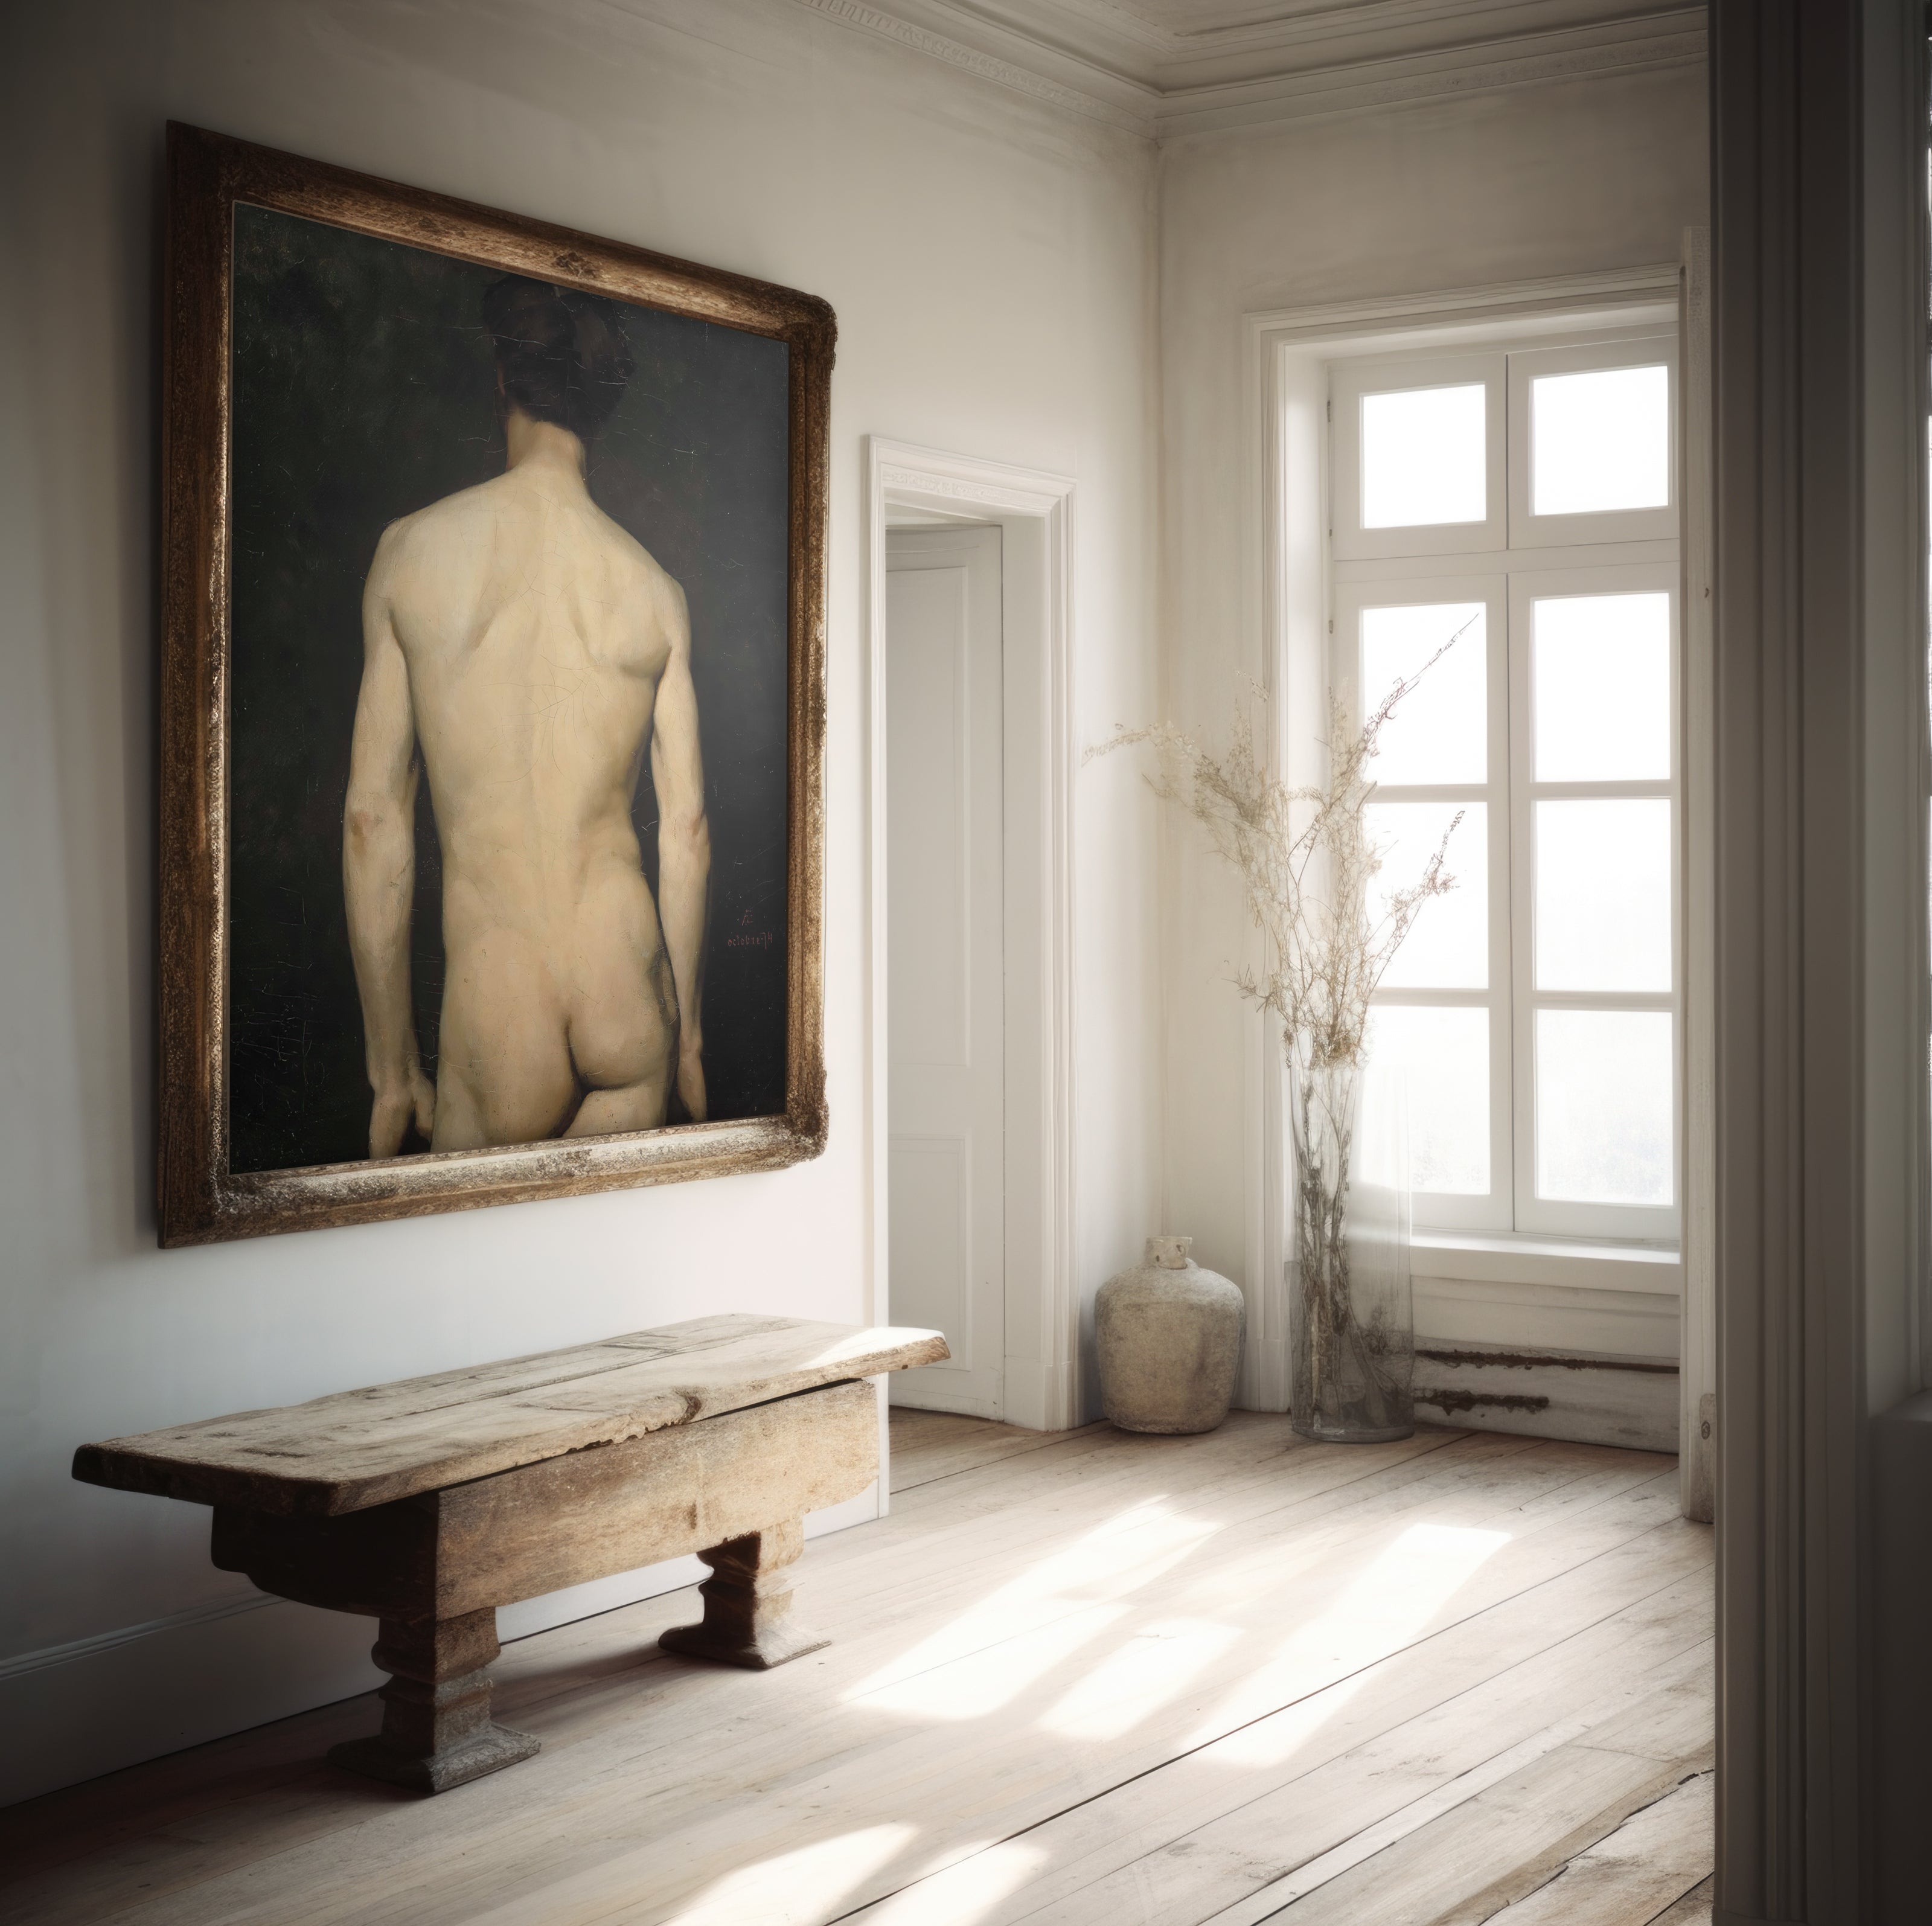 FINE ART PAPER PRINT - NAKED MAN CLASSIC PAINTING 